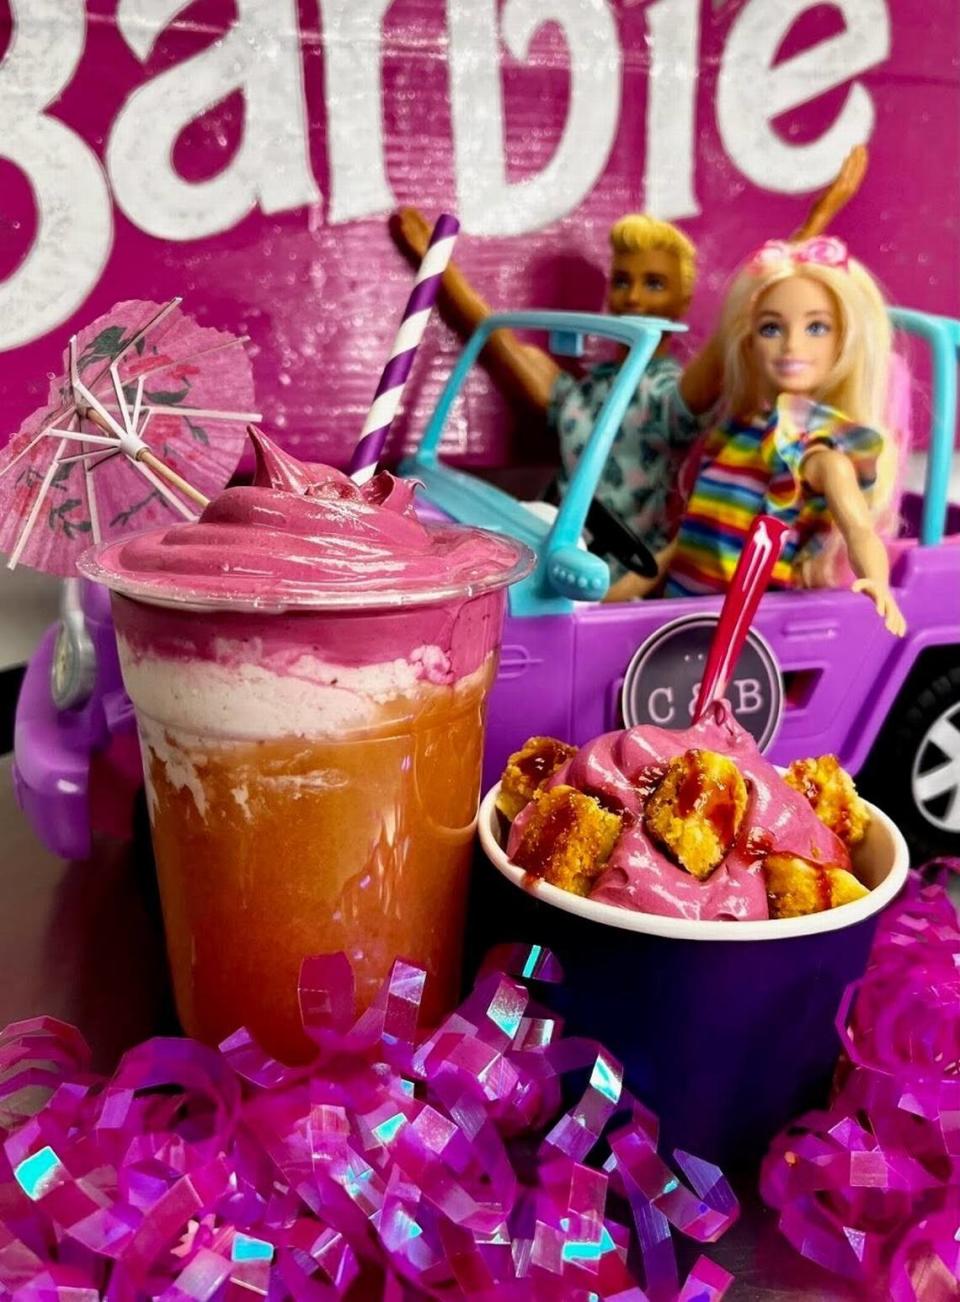 For the “Barbie” movie, Crank and Boom will have a a Malibu Cocktail, left, and Dreamhouse Sundae.